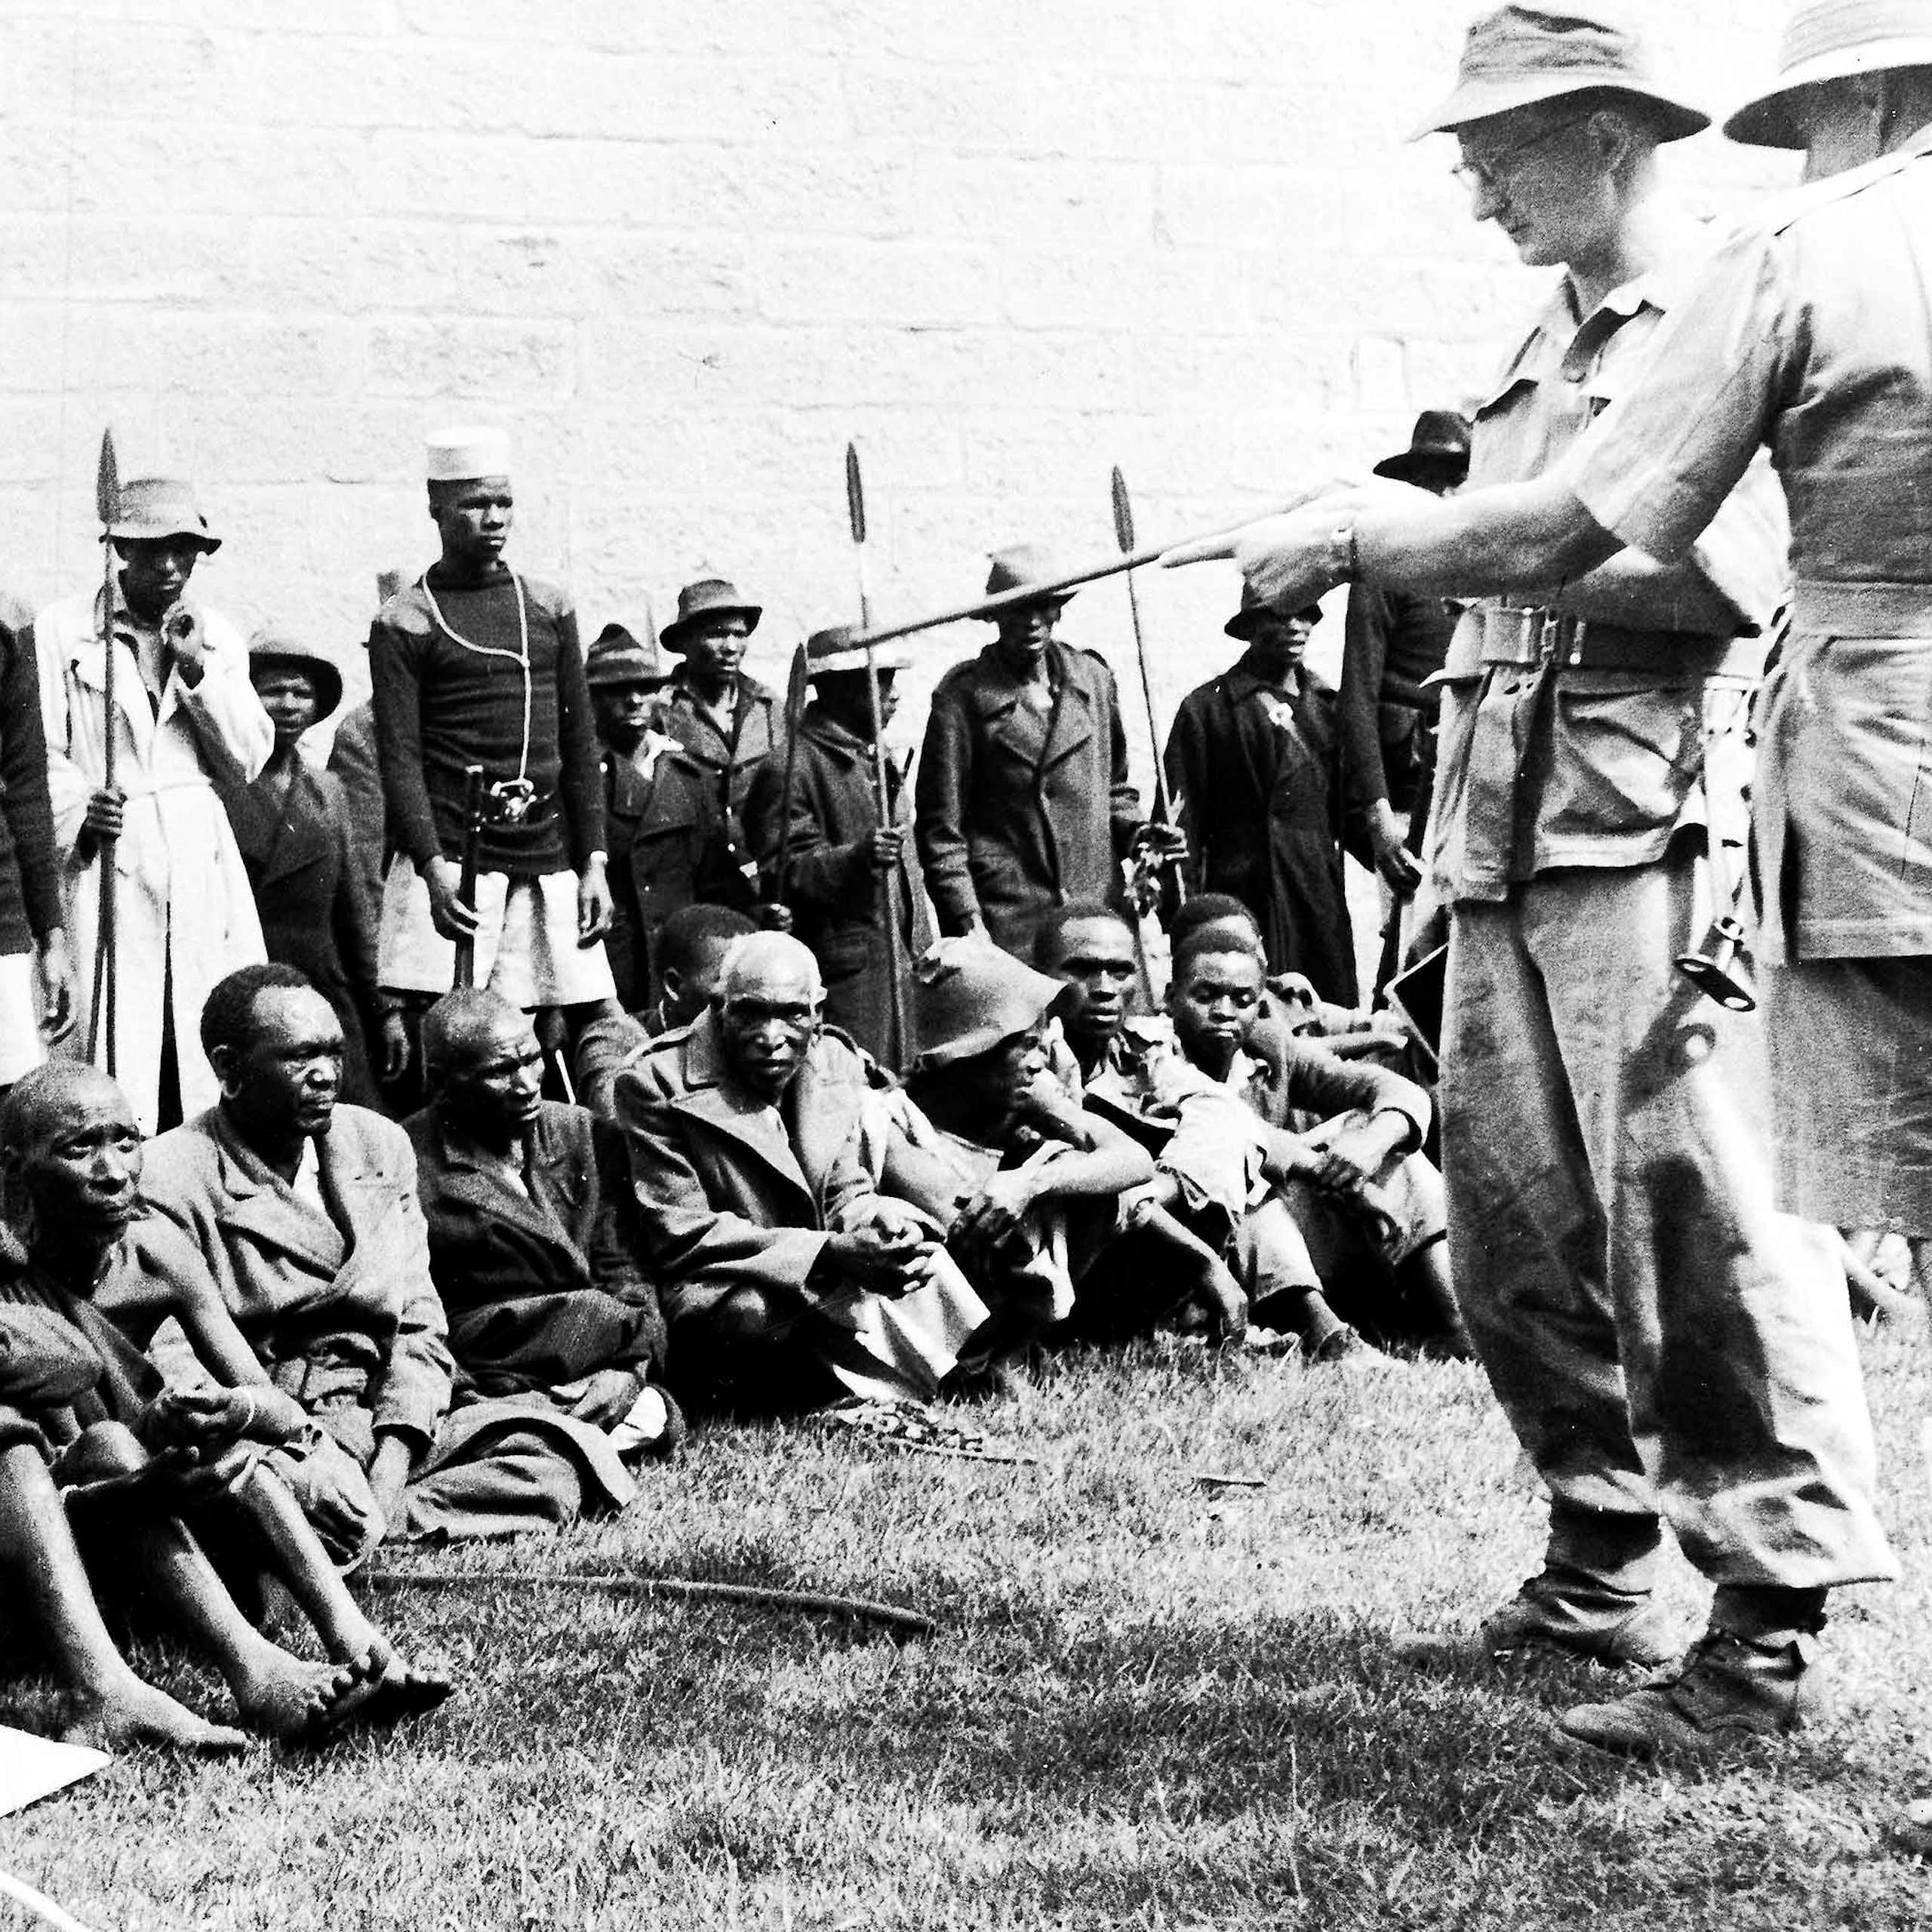 A black and white photo of two white men in uniform carrying guns standing in front of a group of black men seated on the ground. Other men are seen standing in the background. 